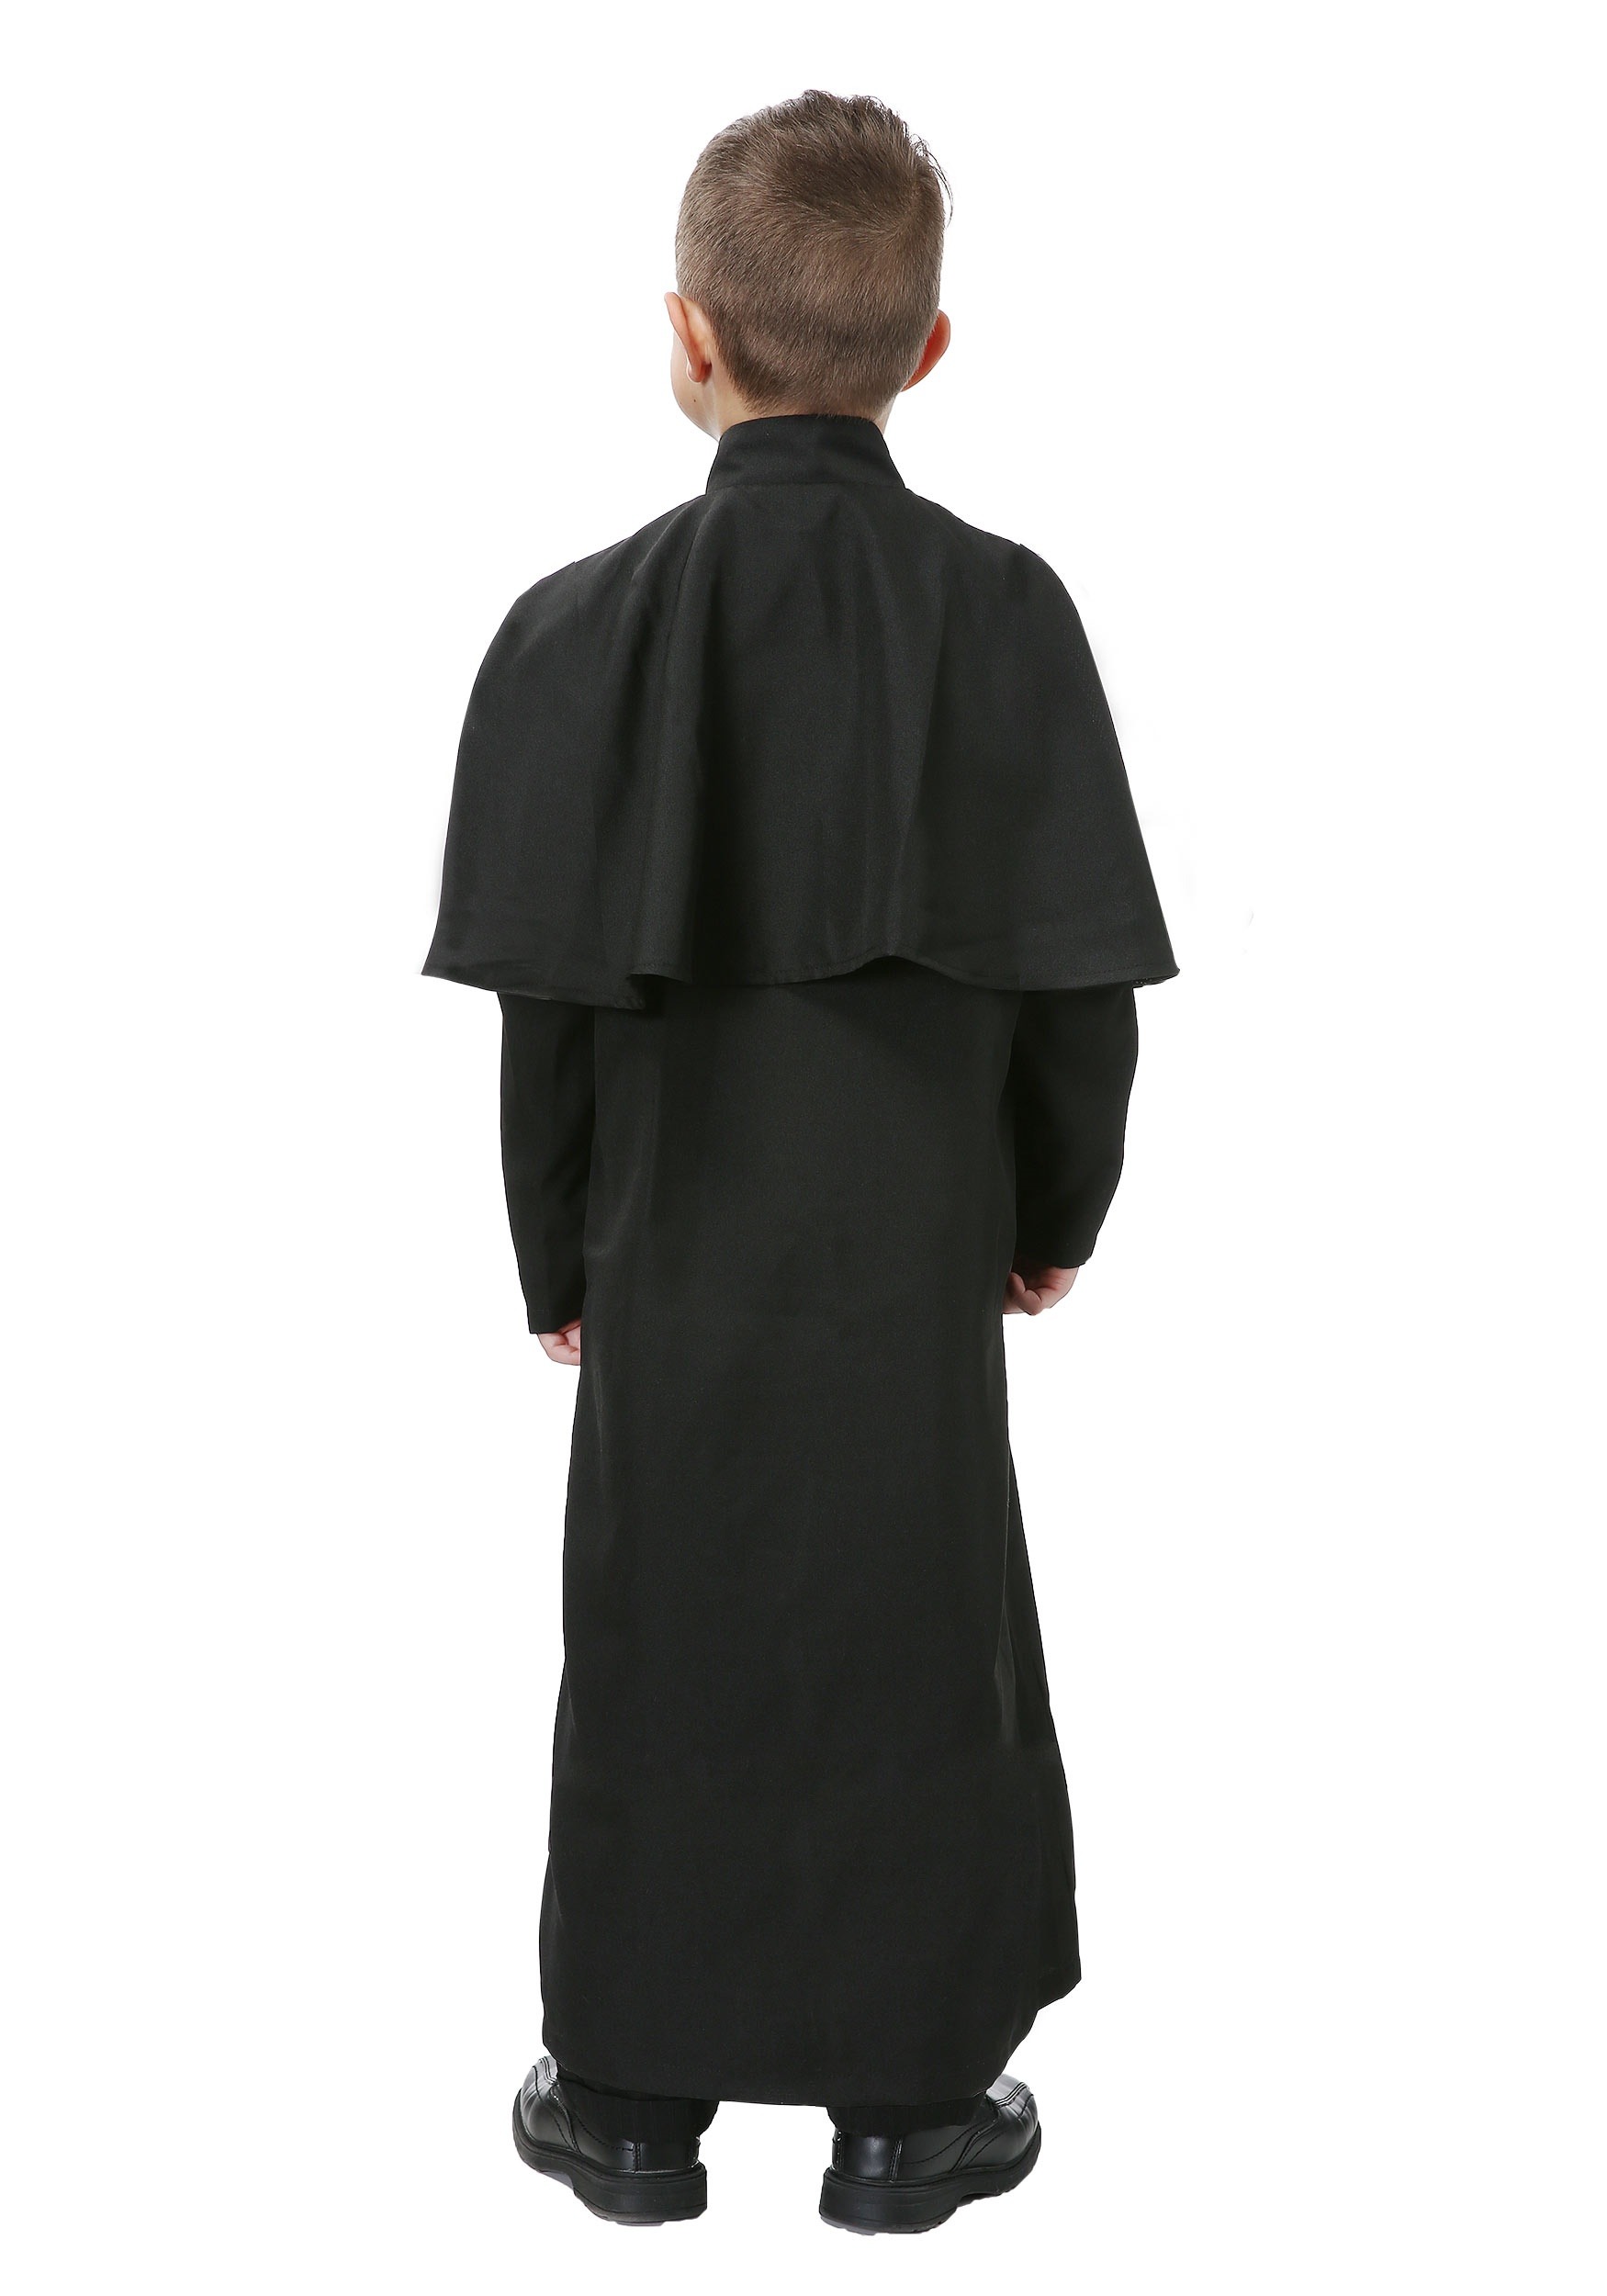 Deluxe Priest Costume For Kids